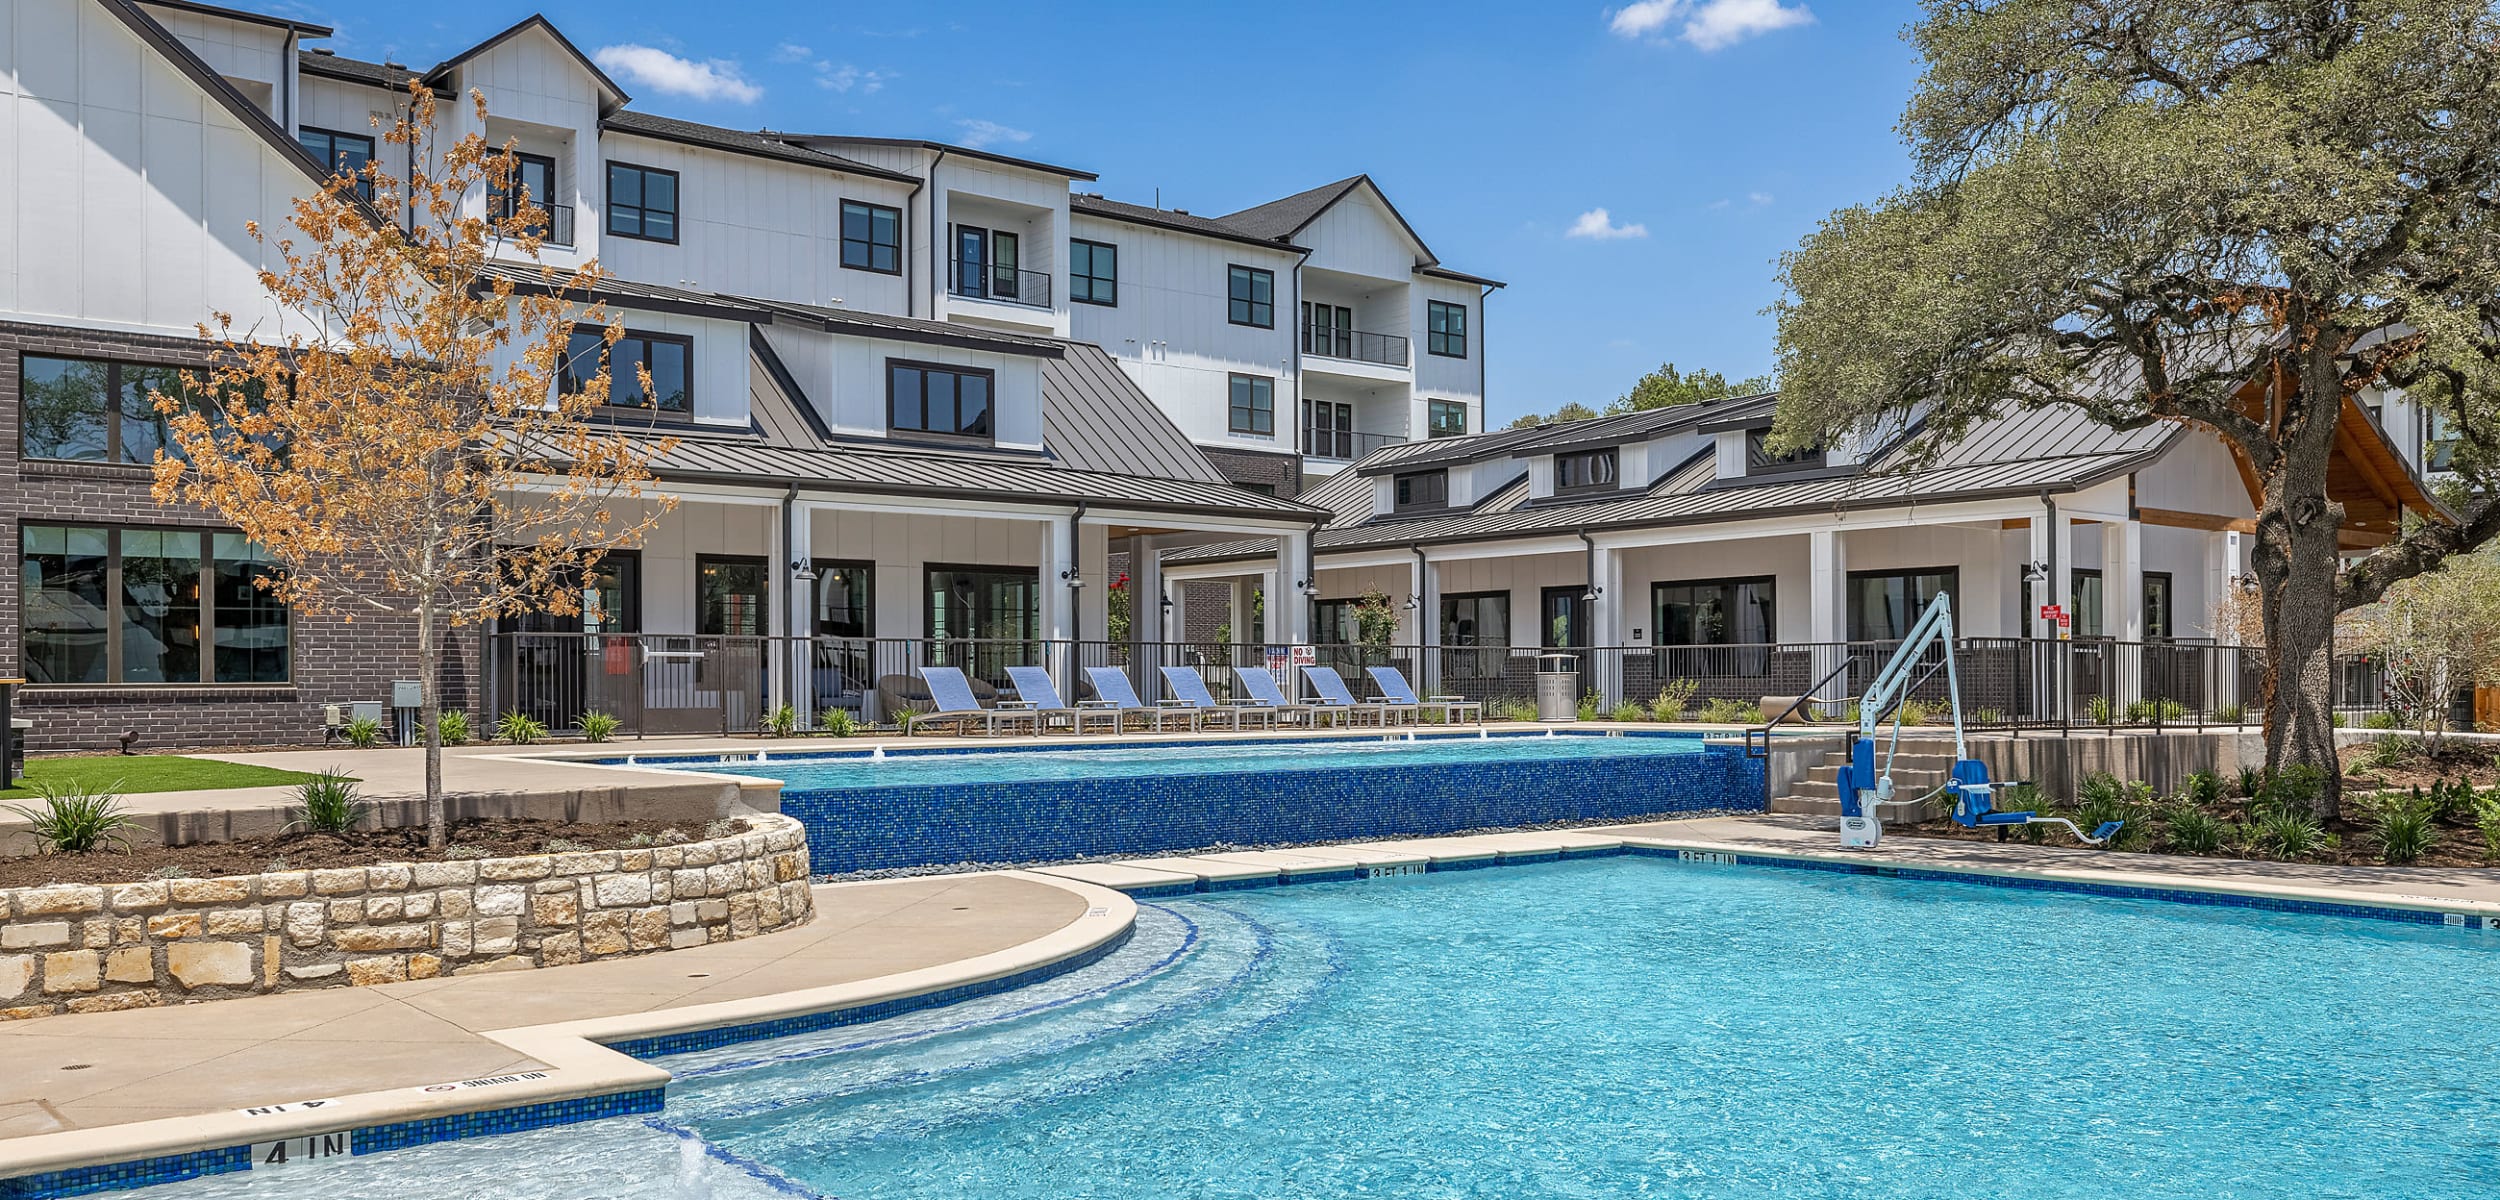 Luxury resort style pool at The Avery in Austin, Texas